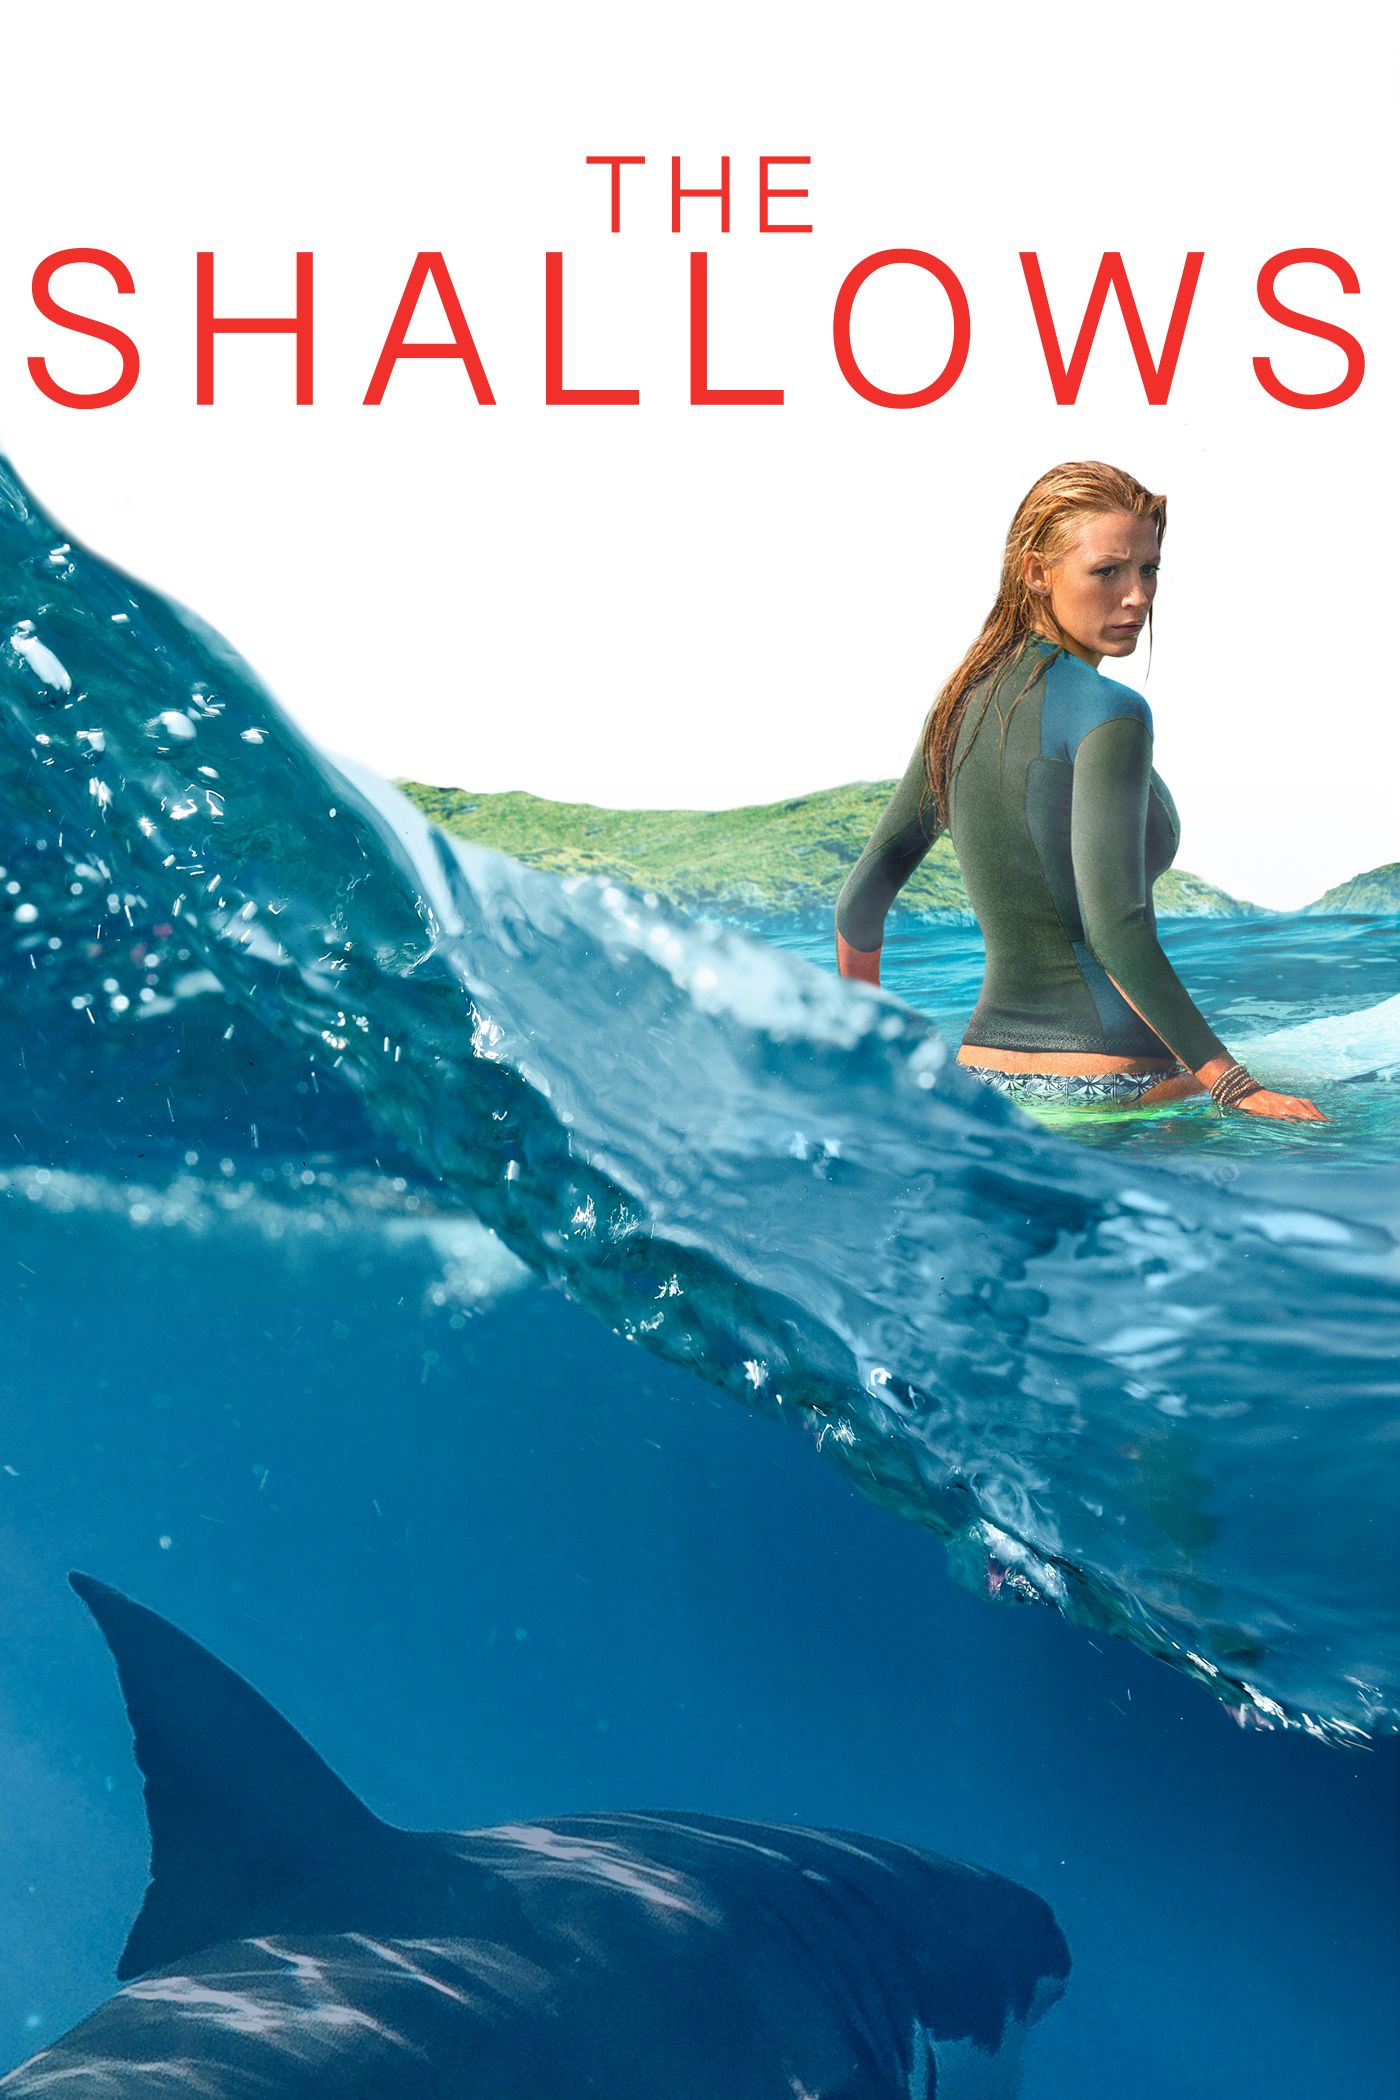 the shallows full movie hd online free